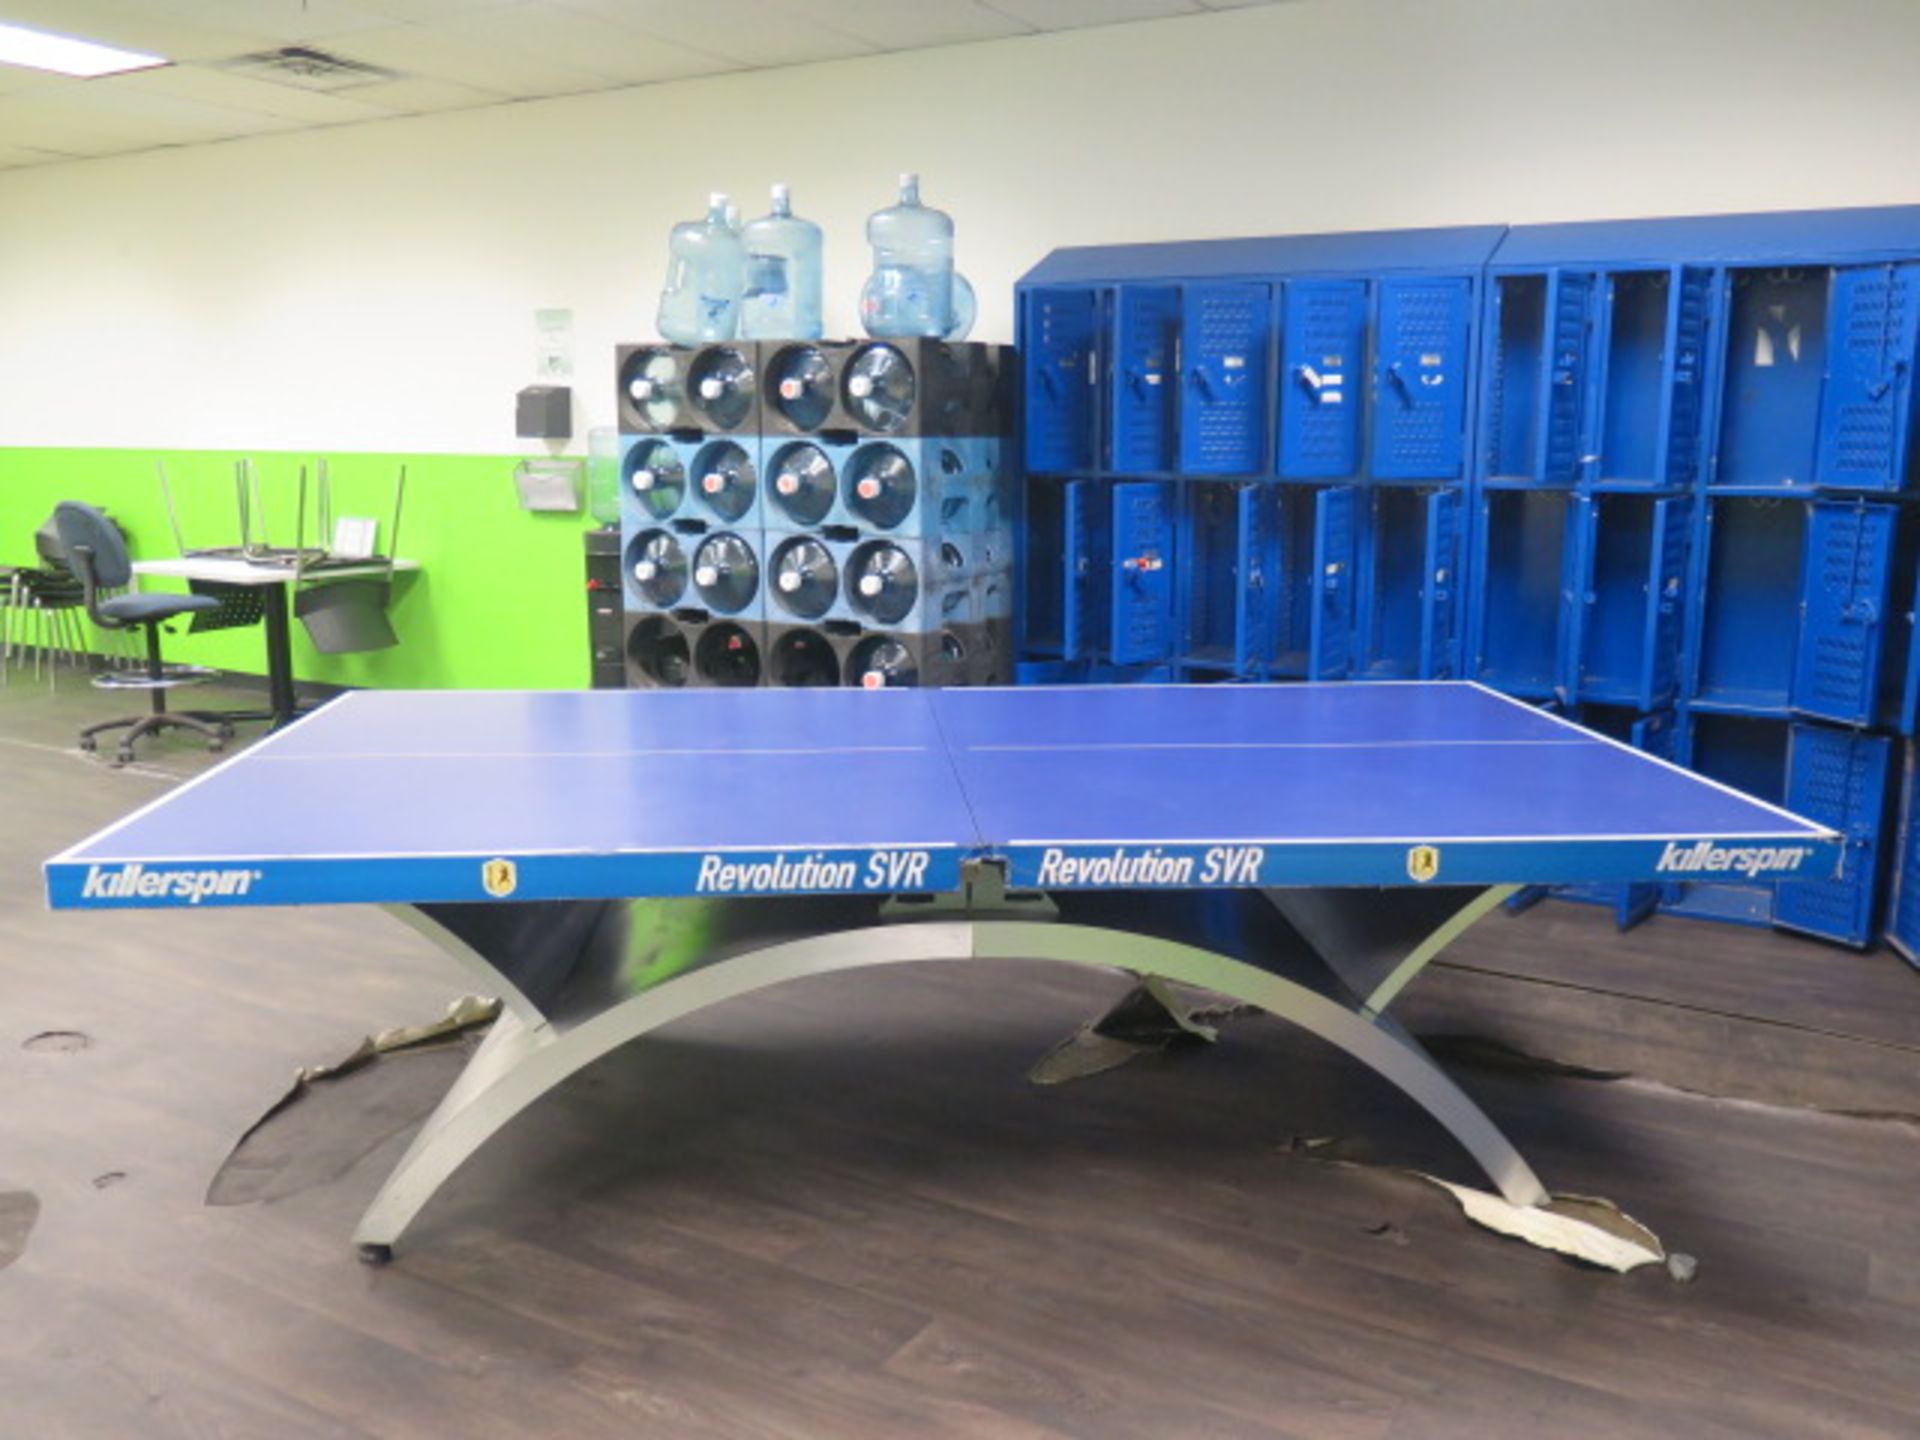 Killerspin "Revolution SVR" Professional Series Ping-Pong Table (SOLD AS-IS - NO WARRANTY) - Image 2 of 8